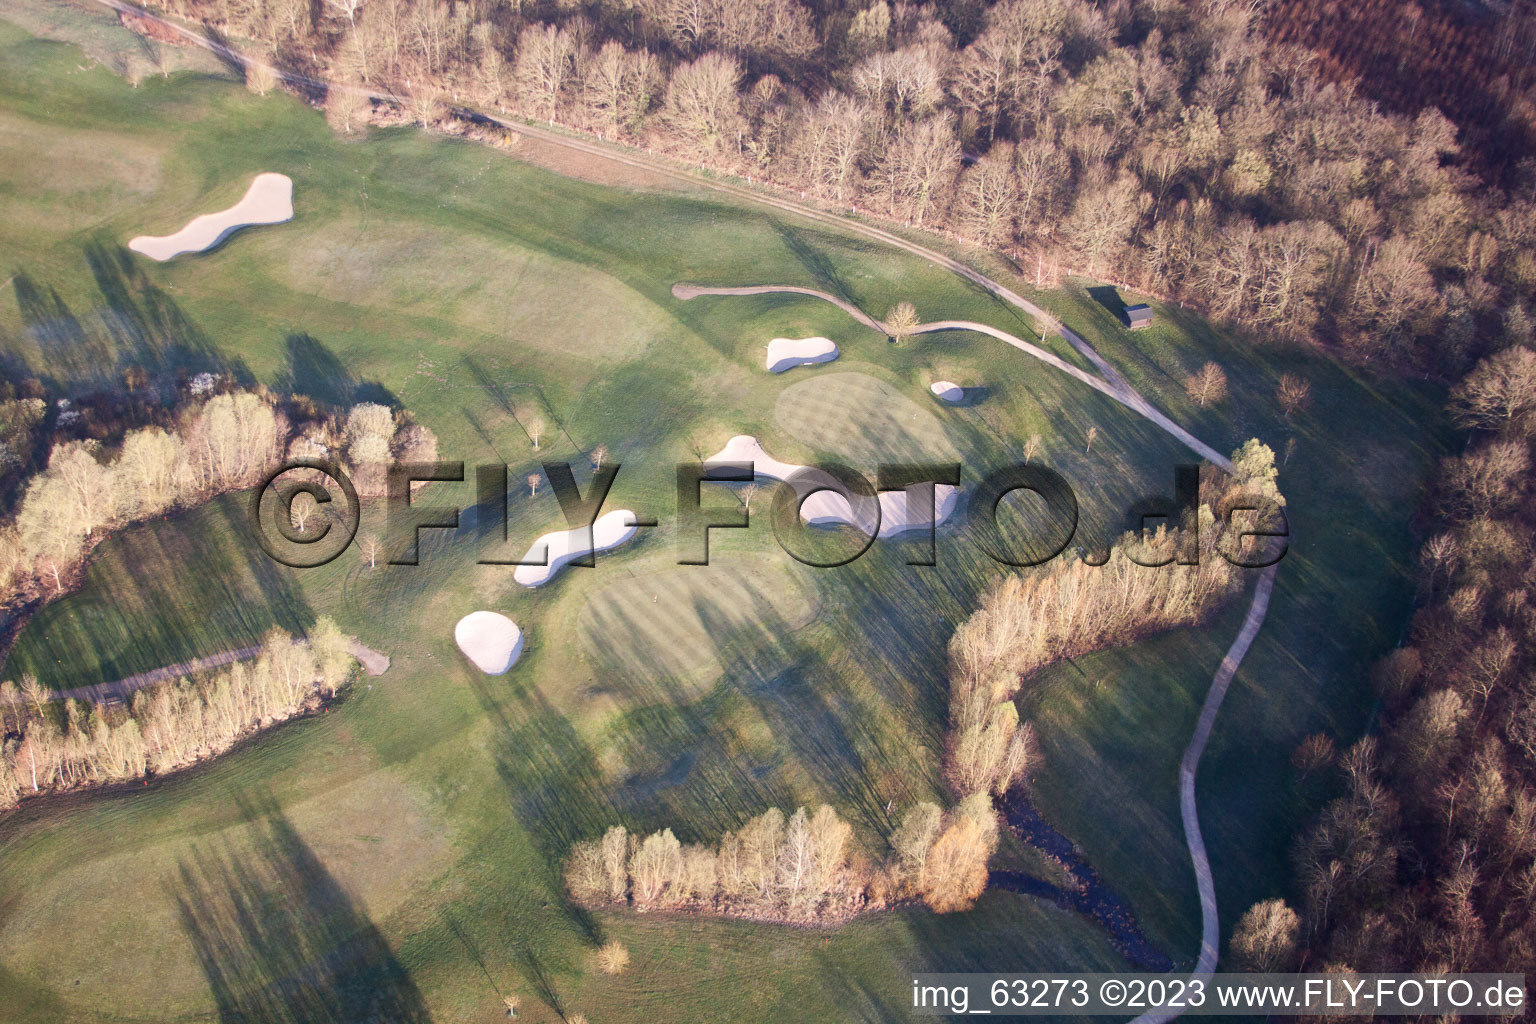 Dreihof Golf Club in Essingen in the state Rhineland-Palatinate, Germany seen from above